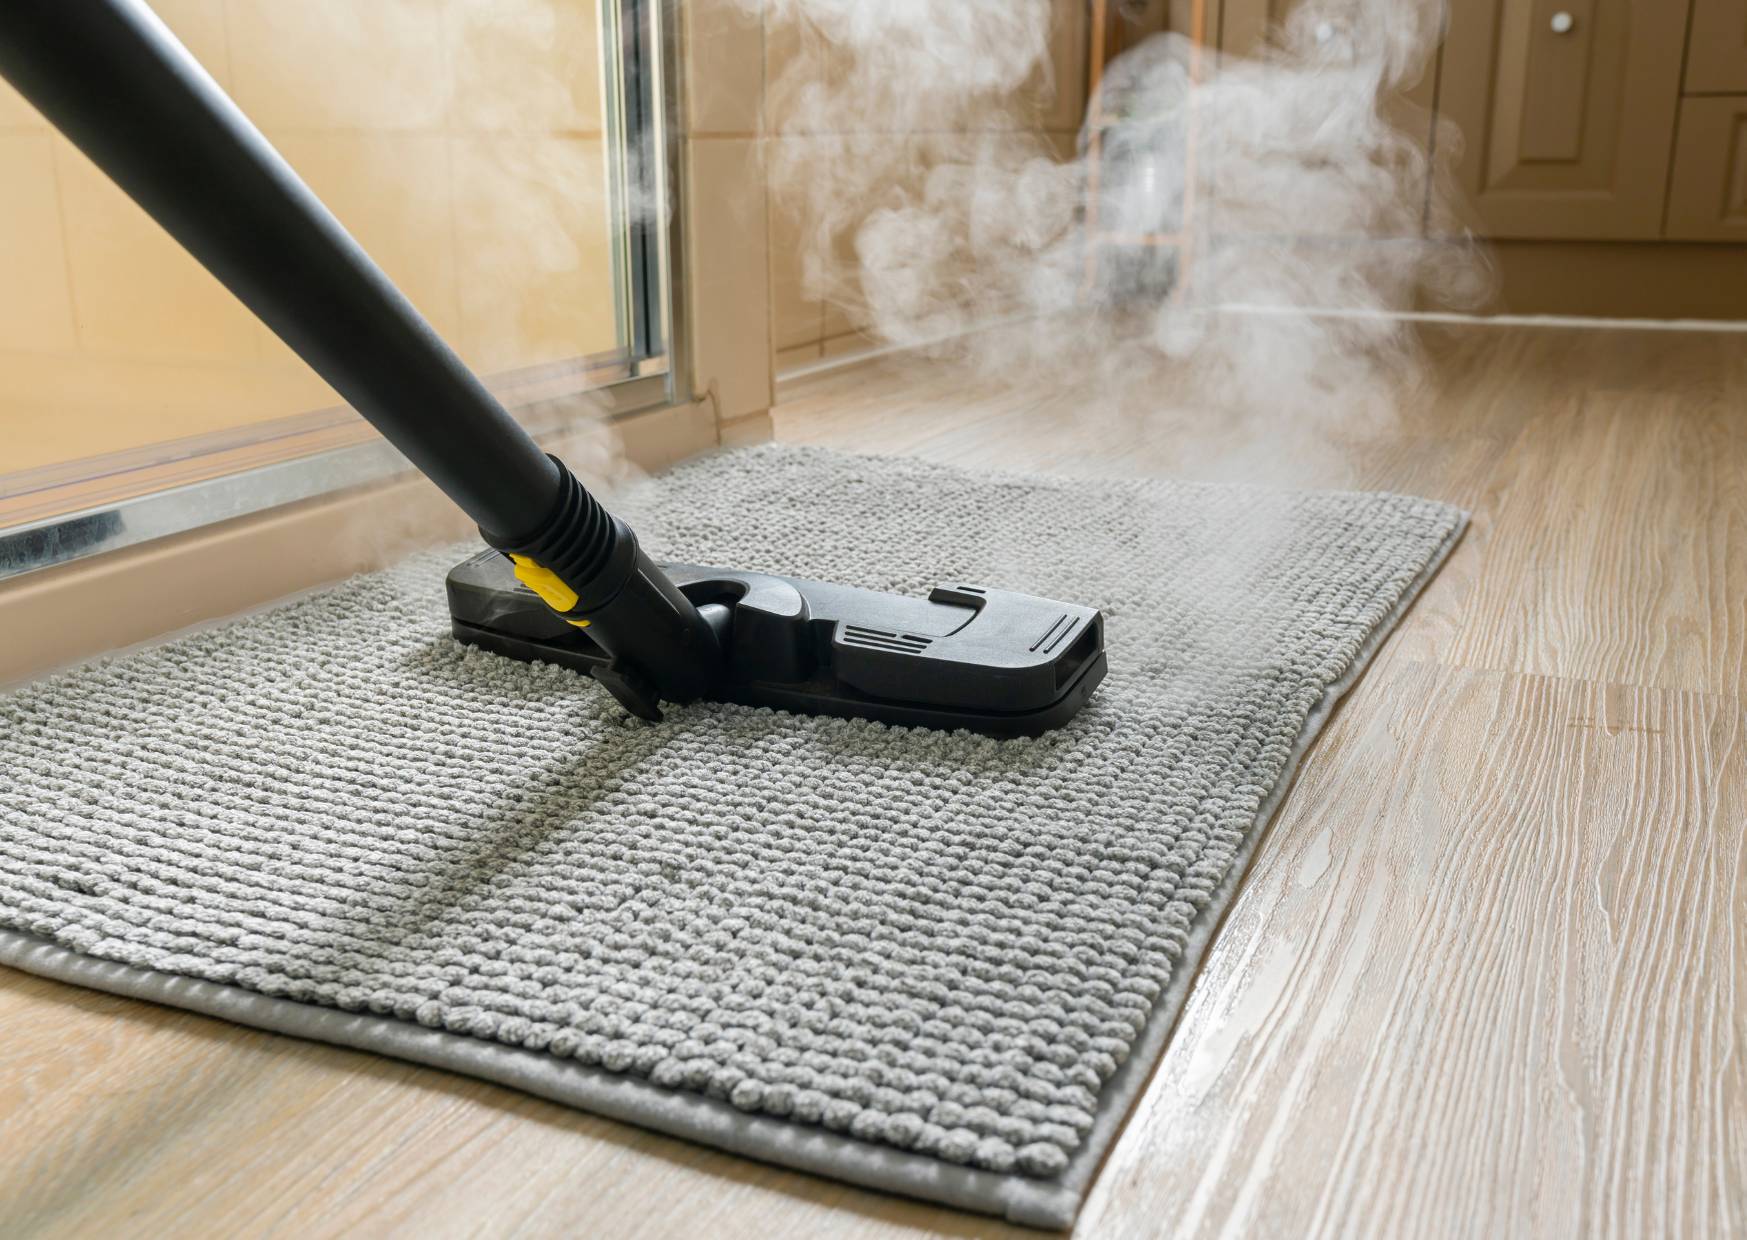 cleaning your bath mat